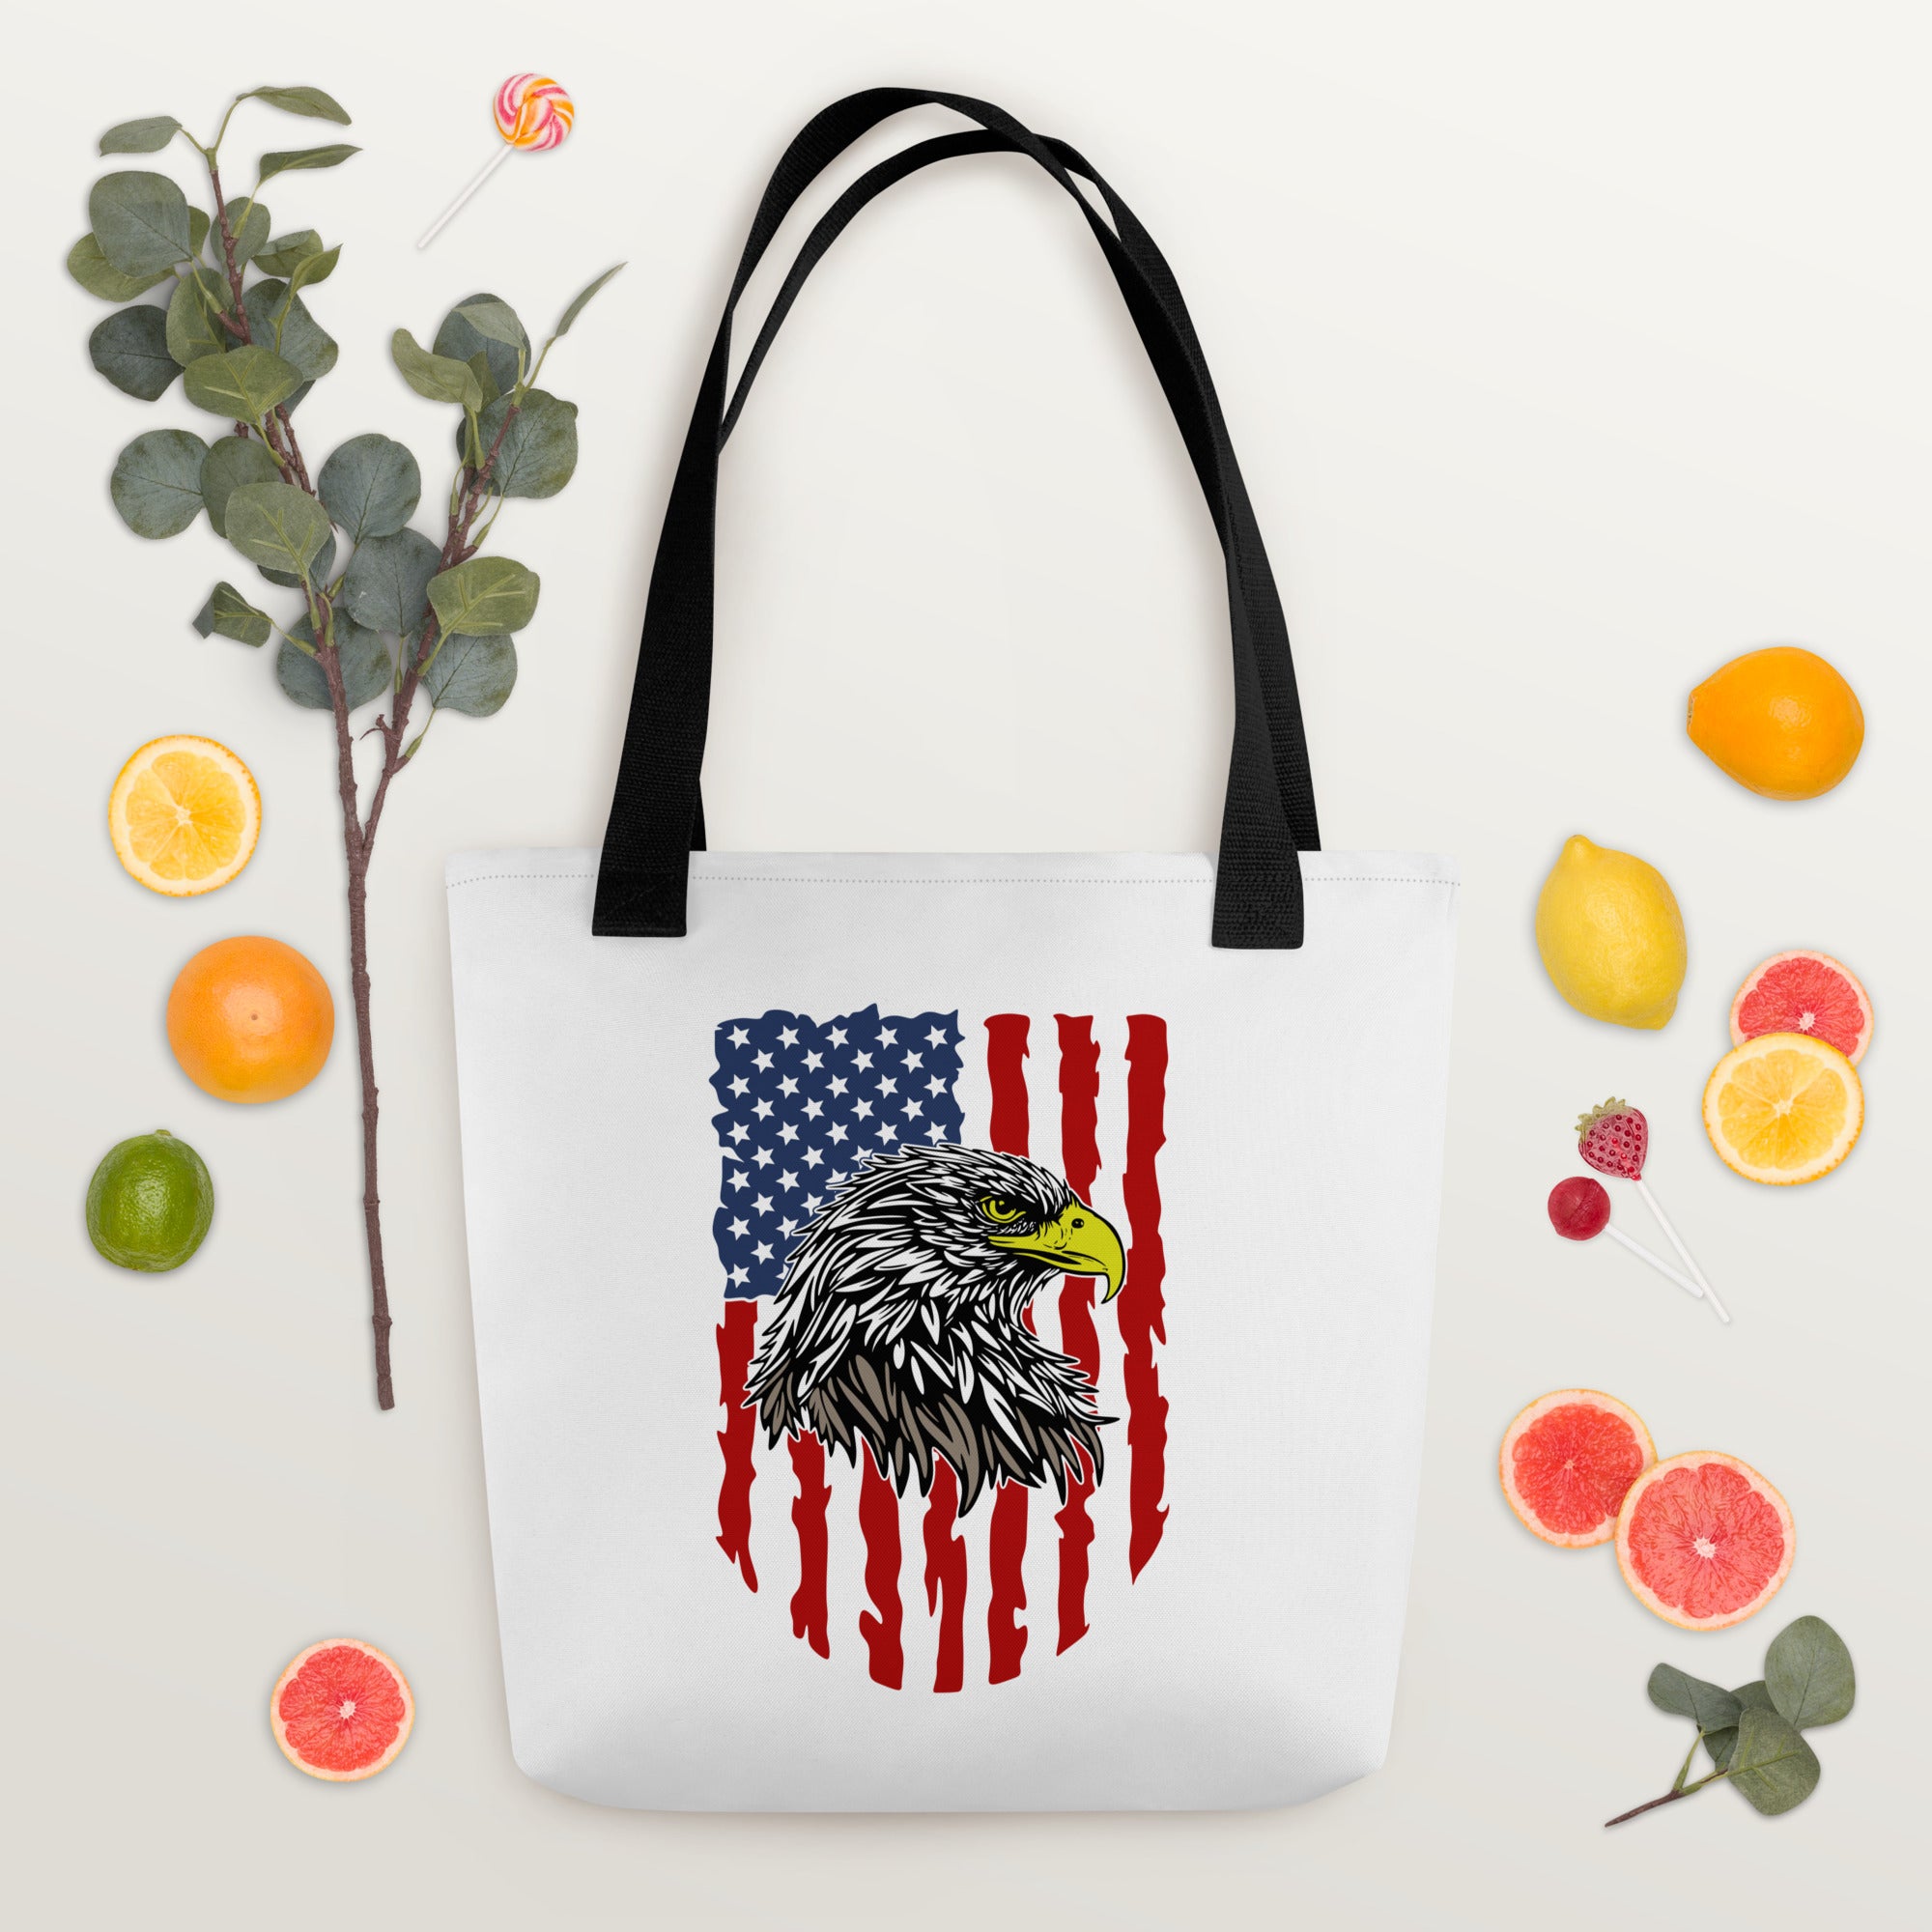 Tote bag- Eagle 4th of July